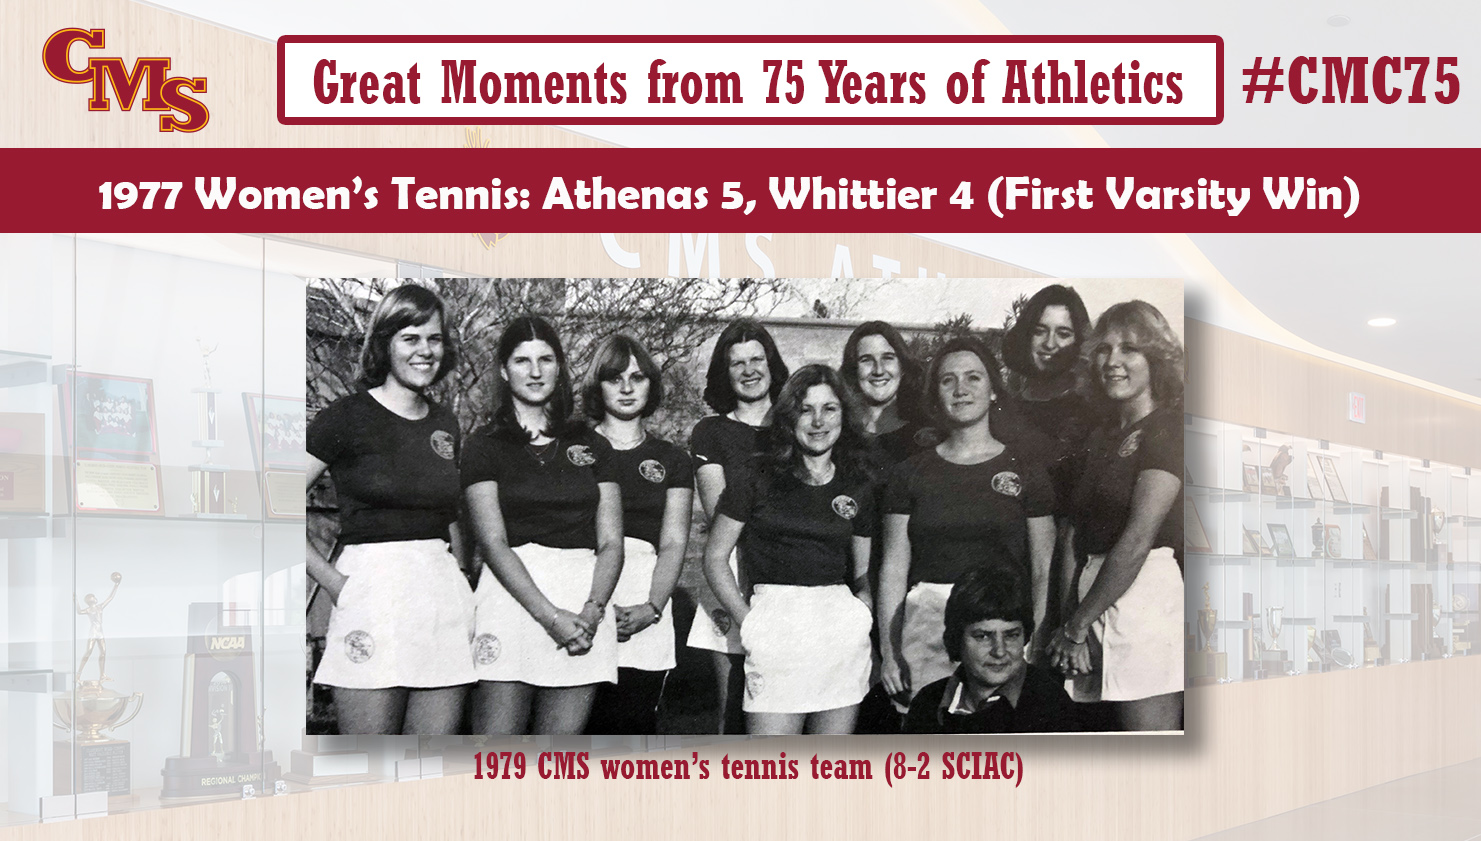 The 1979 women's tennis team (first team shot available). Words over the picture read: Great Moments from 75 Years of Athletics, 1977 Women's Tennis: Athenas 5, Whittier 4 (First Varsity win)